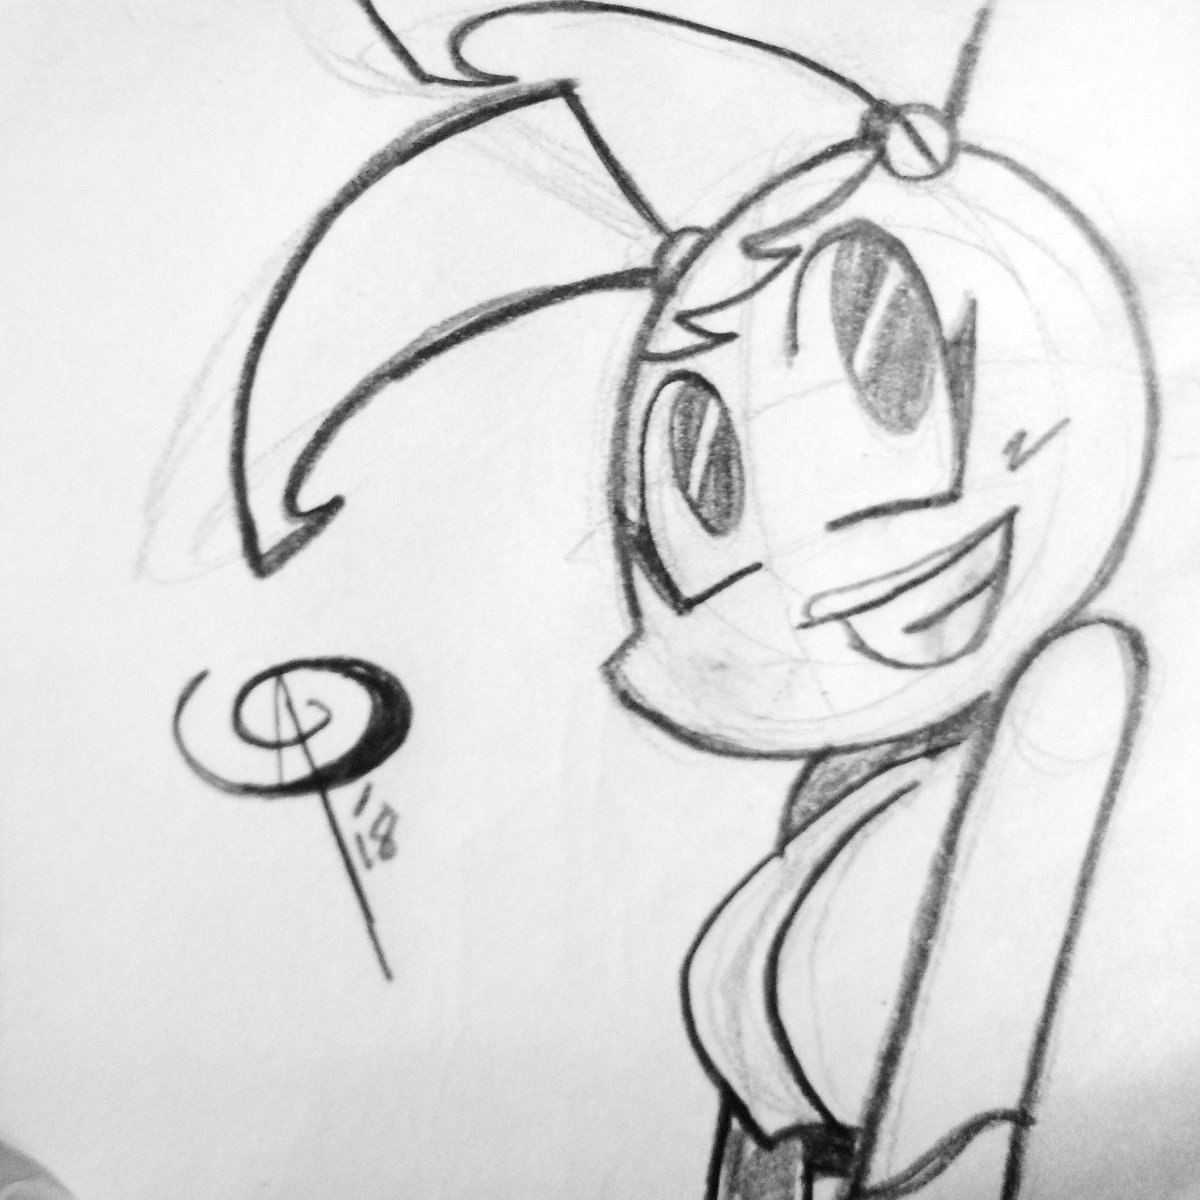 RT @Chillguydraws: Sketch-a-day 211
Jenny Wakeman from My Life as a Teenage Robot https://t.co/nxUKlO2Jqx